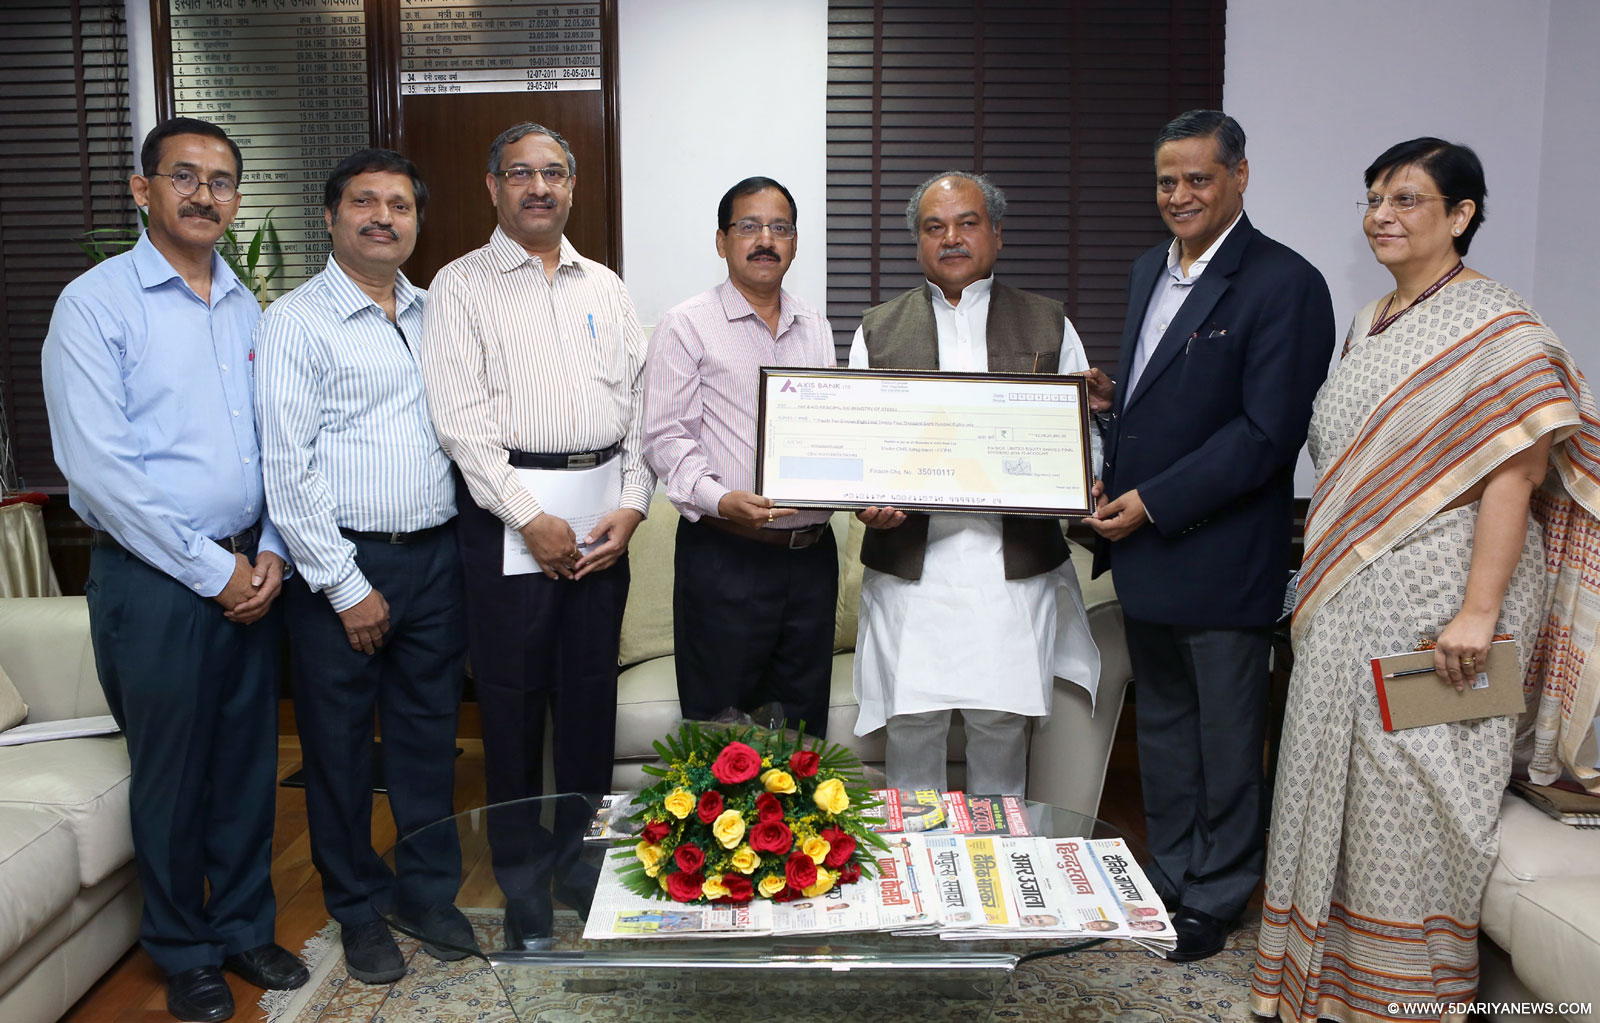 The Union Minister for Mines and Steel, Shri Narendra Singh Tomar being received a dividend cheque by the Chairman-cum-Managing Director of MOIL, Shri G.P Kundargi, in New Delhi on October 12, 2015. The Secretary, Ministry of Micro, Small & Medium Enterprises and Steel, Dr. Anup K. Pujari is also seen.